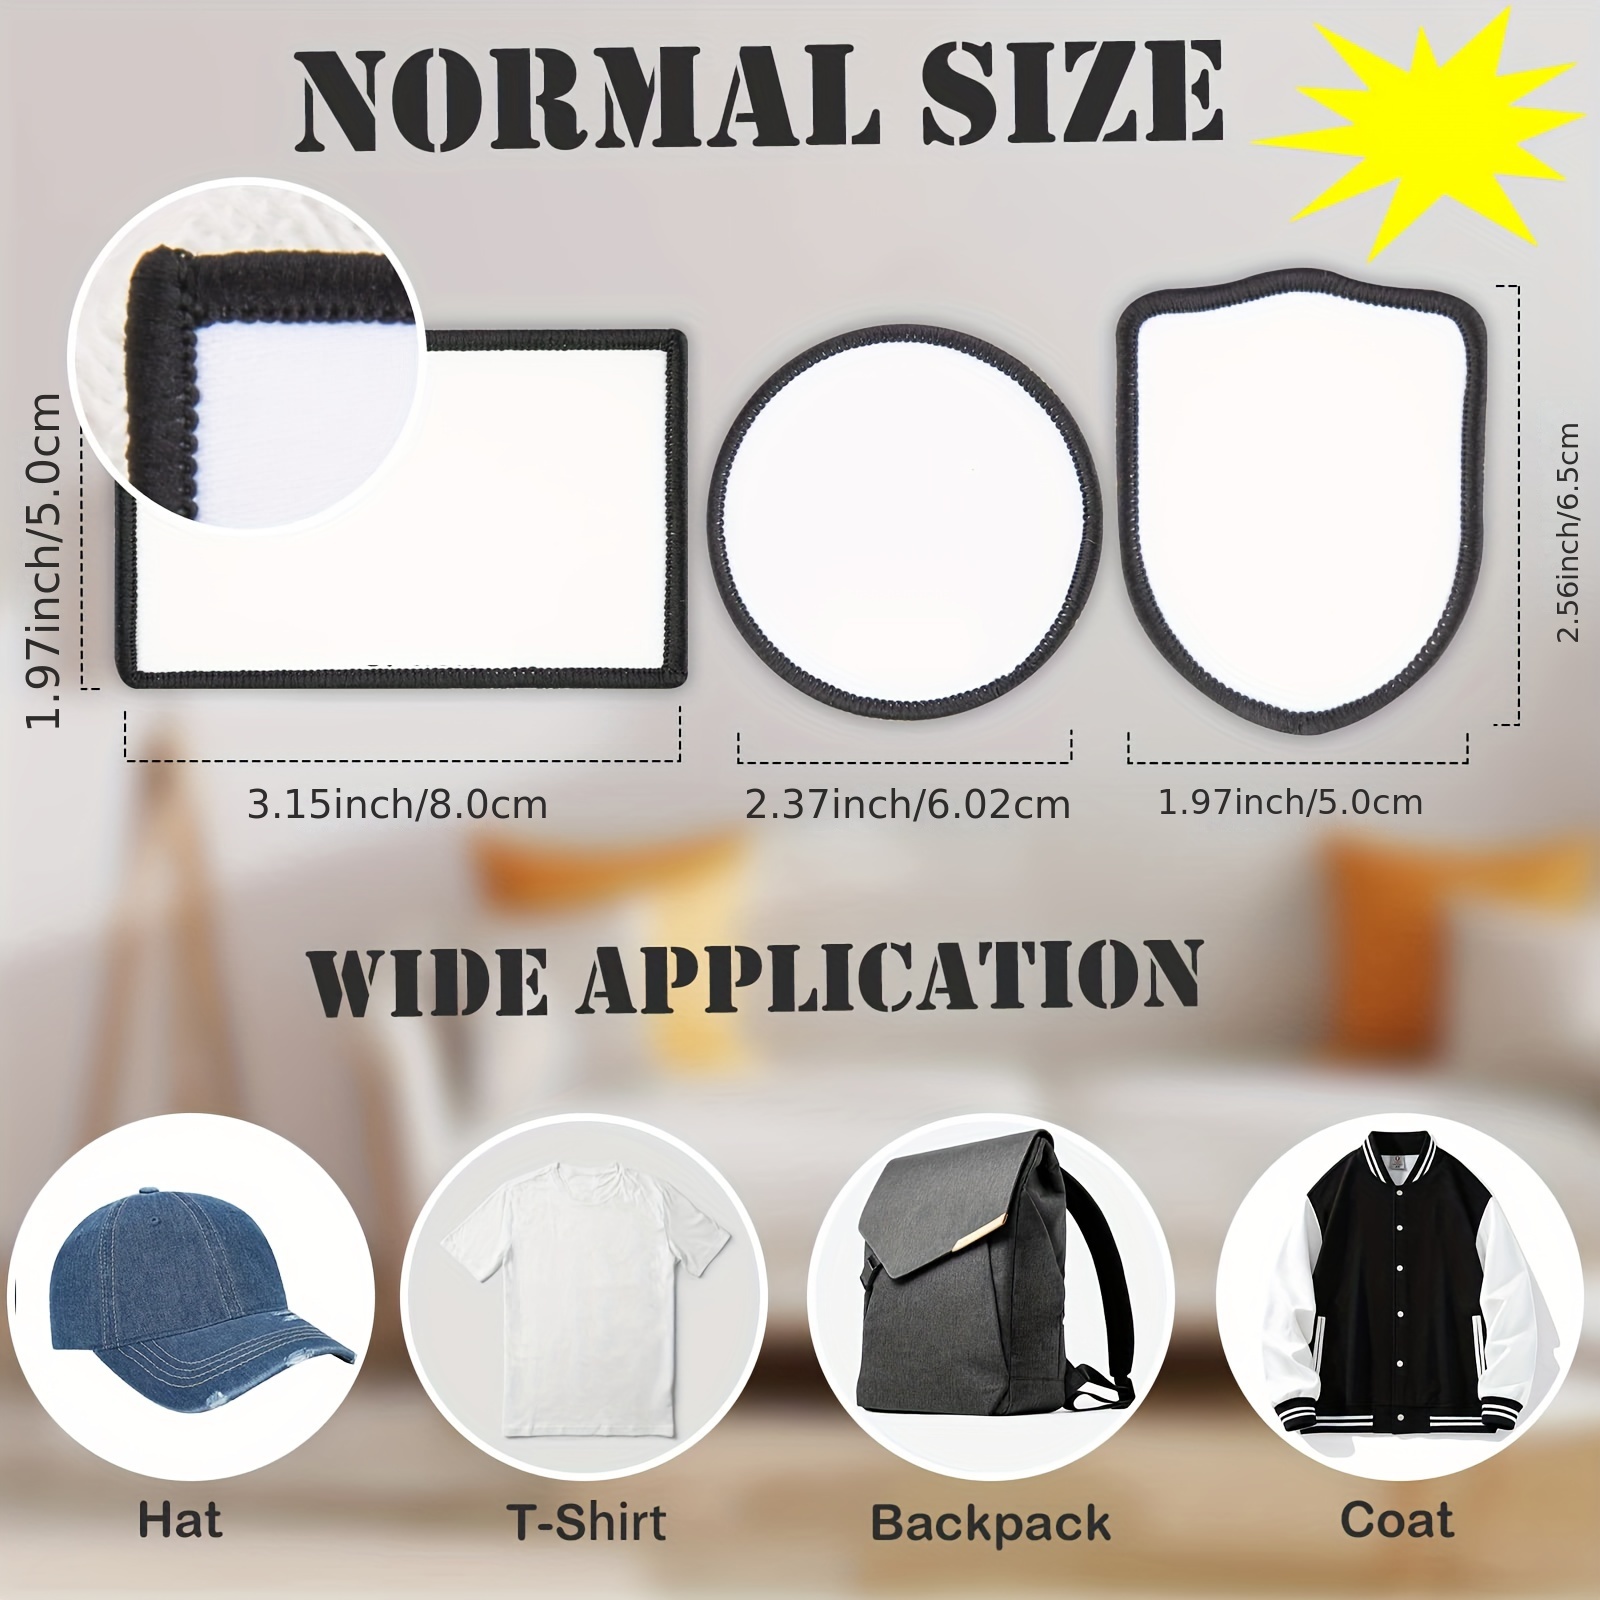 Iron On Sublimation Patch Blanks With 3 Shapes For Thermal Transfer Ideal  For Clothing, Blank Trucker Hats, Uniforms, Backpacks Black Frame From  Esund05, $0.27